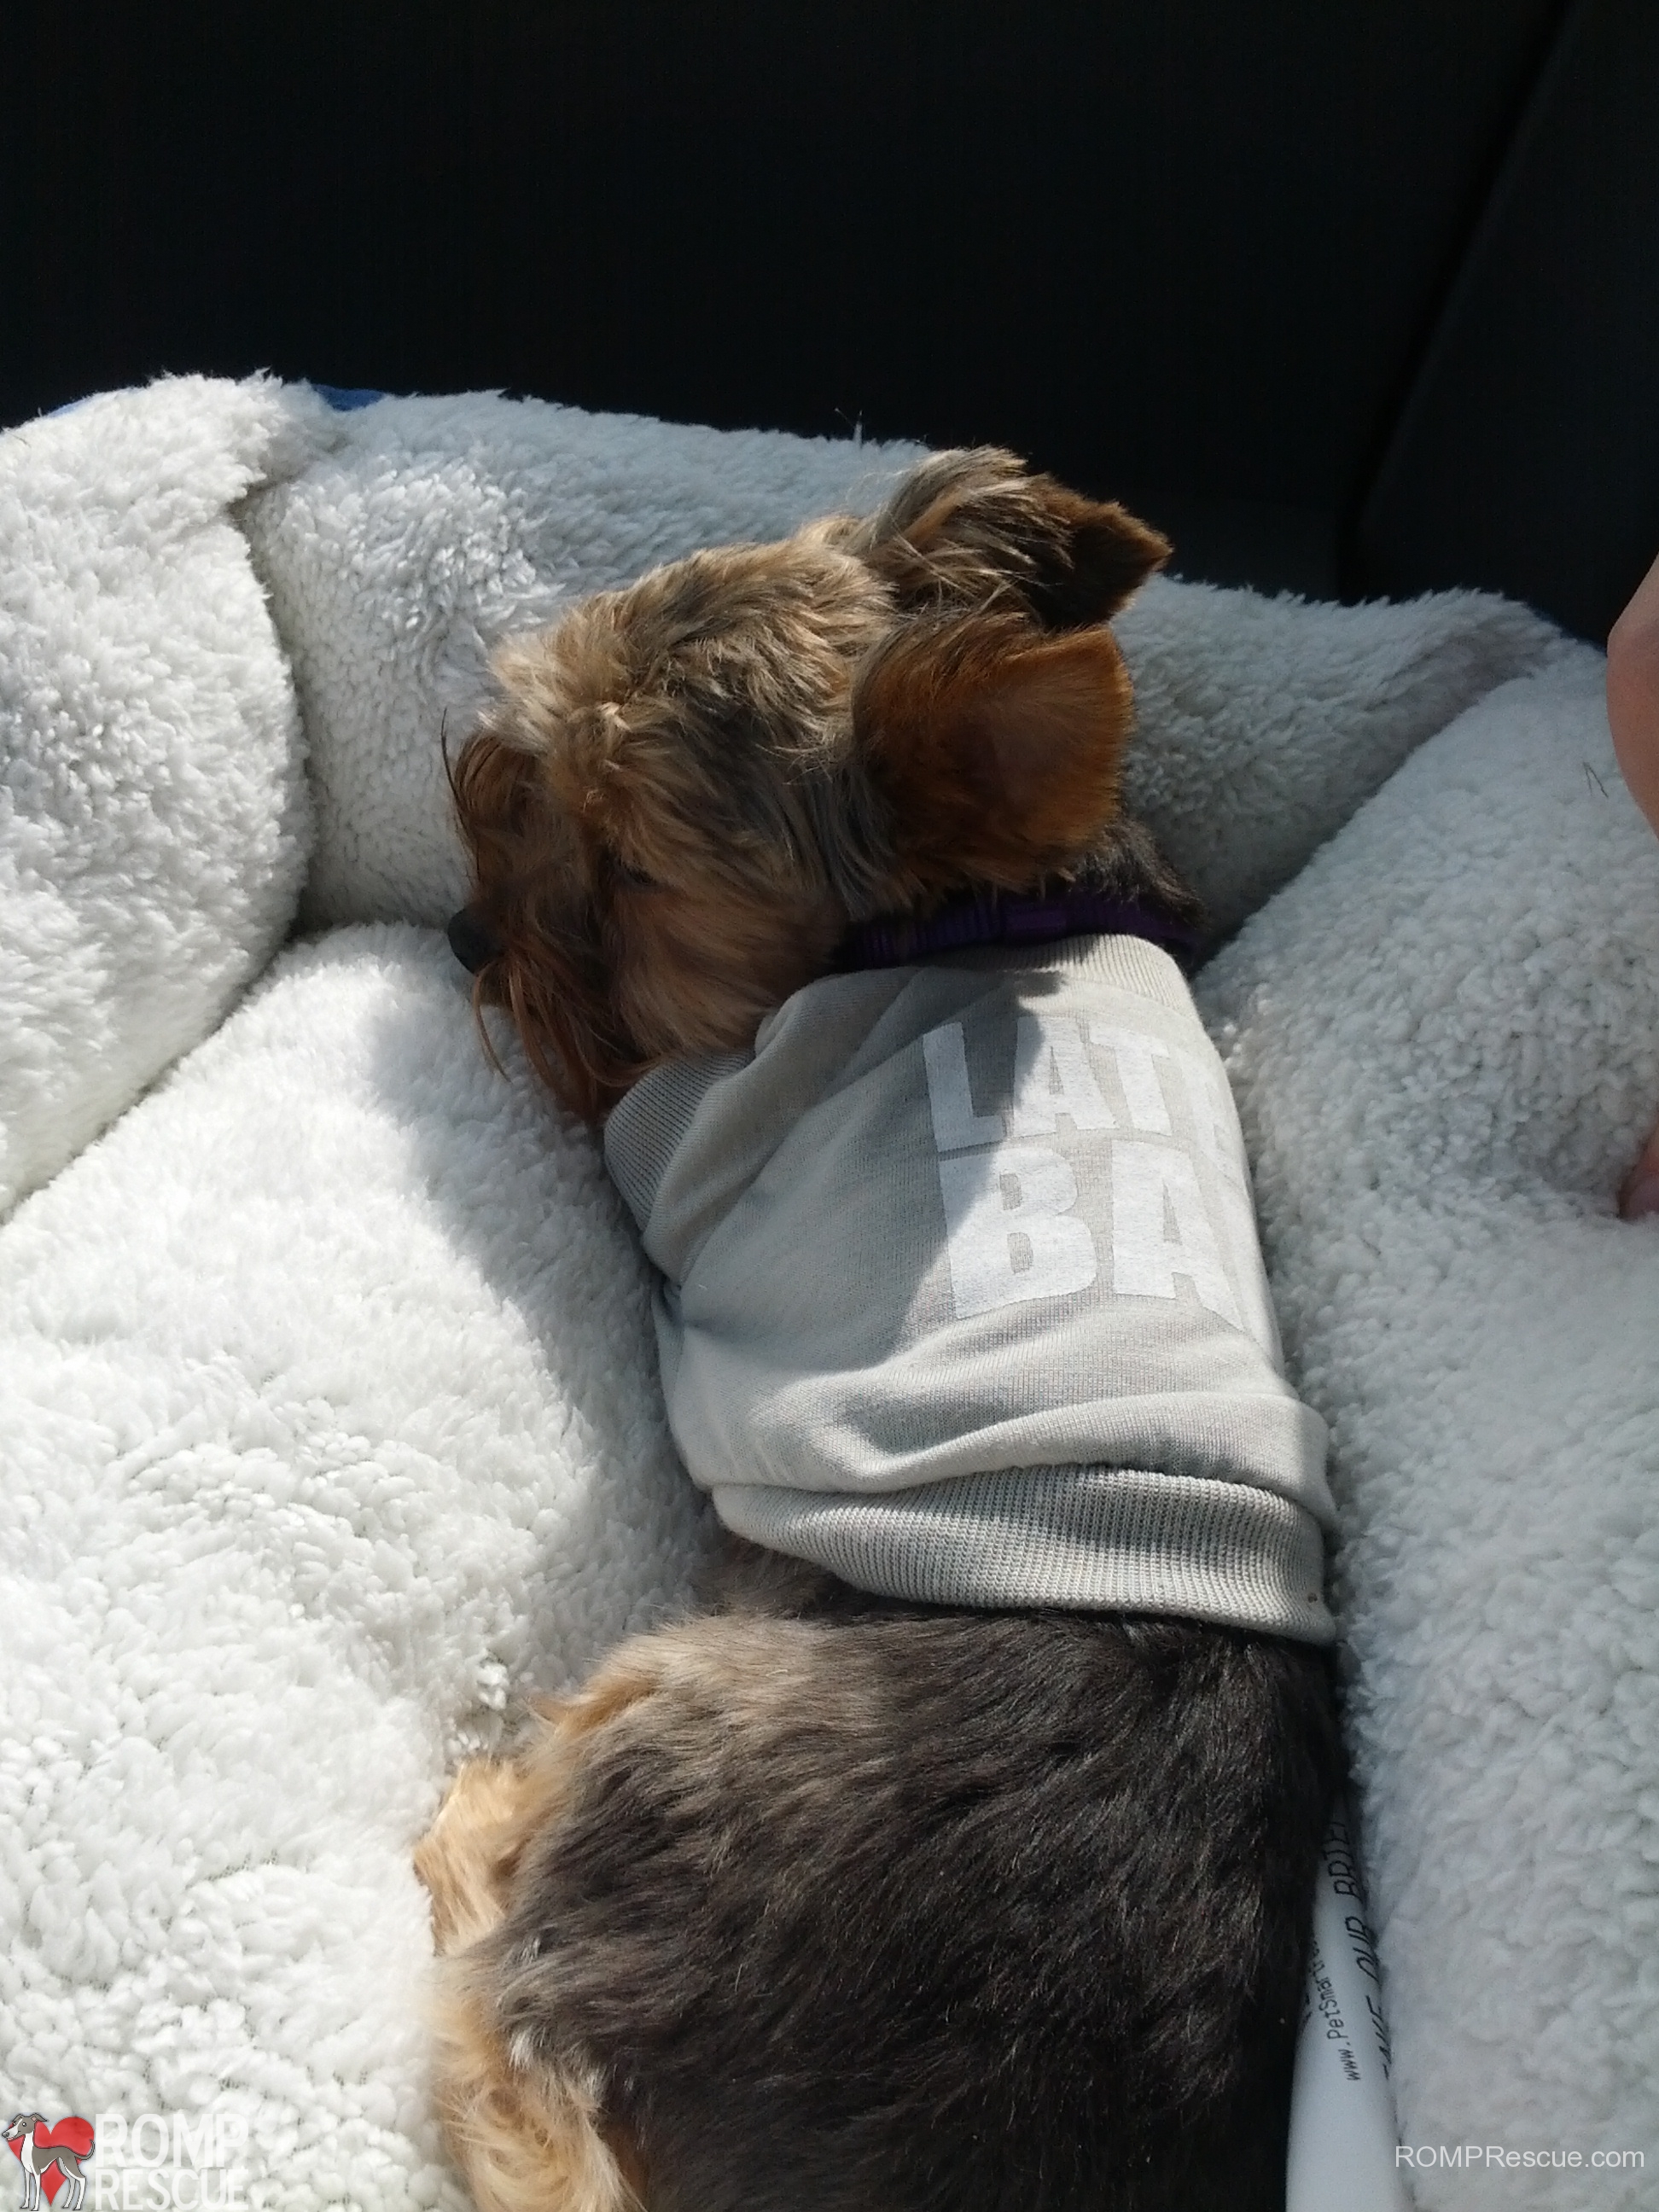 Chicago Yorkie Rescue, Chicago teacup yorkies, teacup yorkies, chicago, yorkie, yorkies, teacup, tea cup, puppy, puppies, rescue, adopt, available, shelter